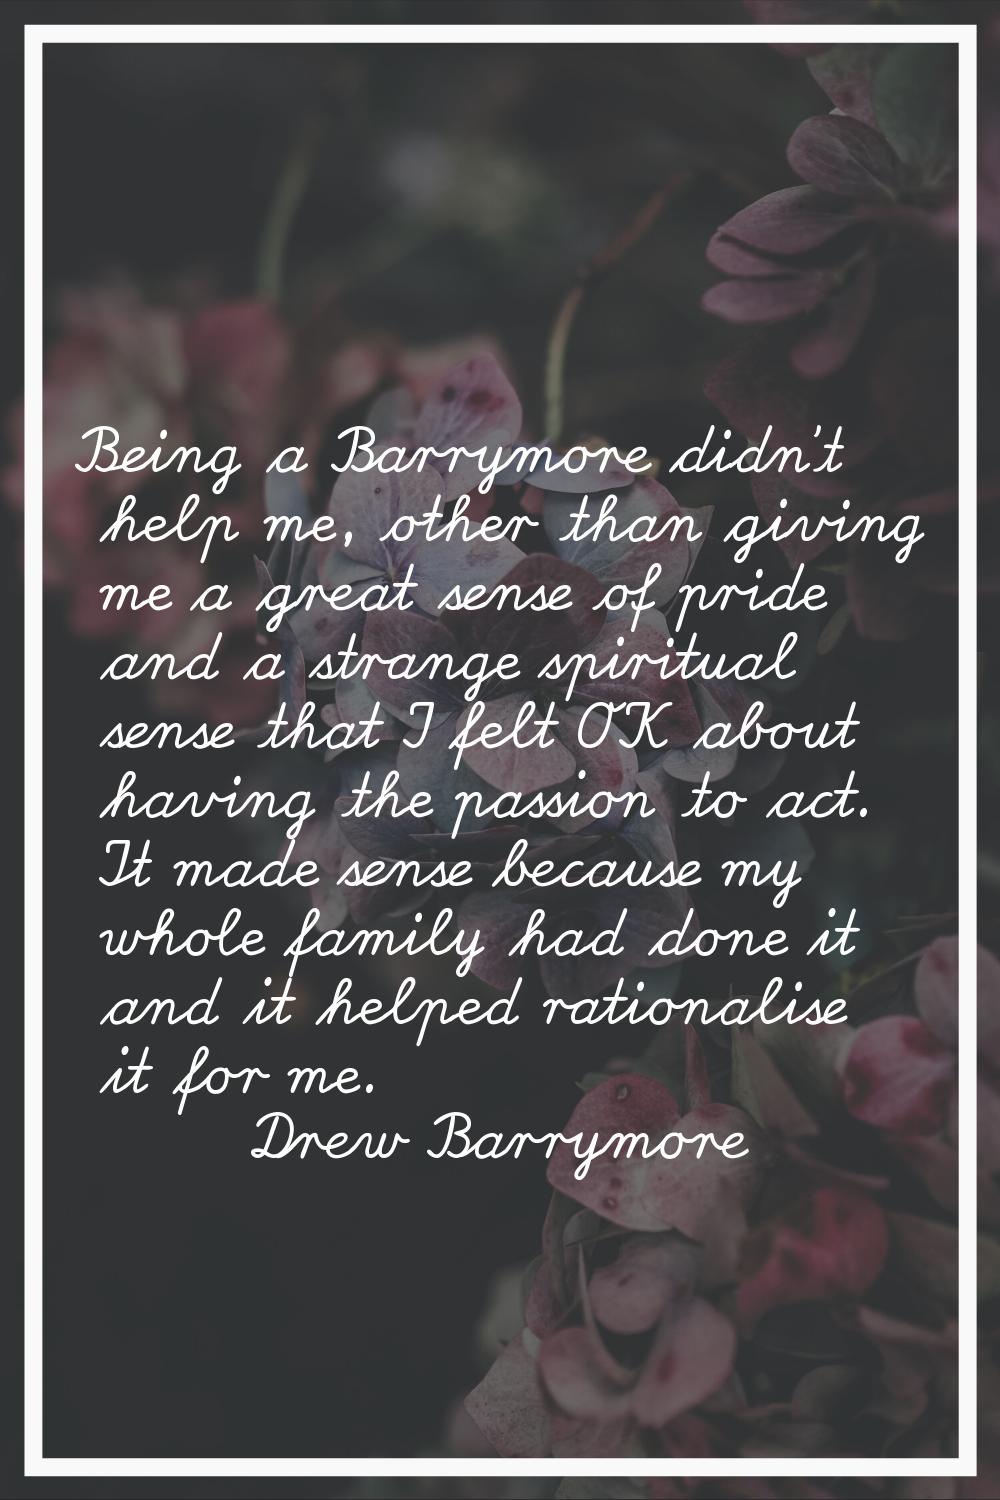 Being a Barrymore didn't help me, other than giving me a great sense of pride and a strange spiritu